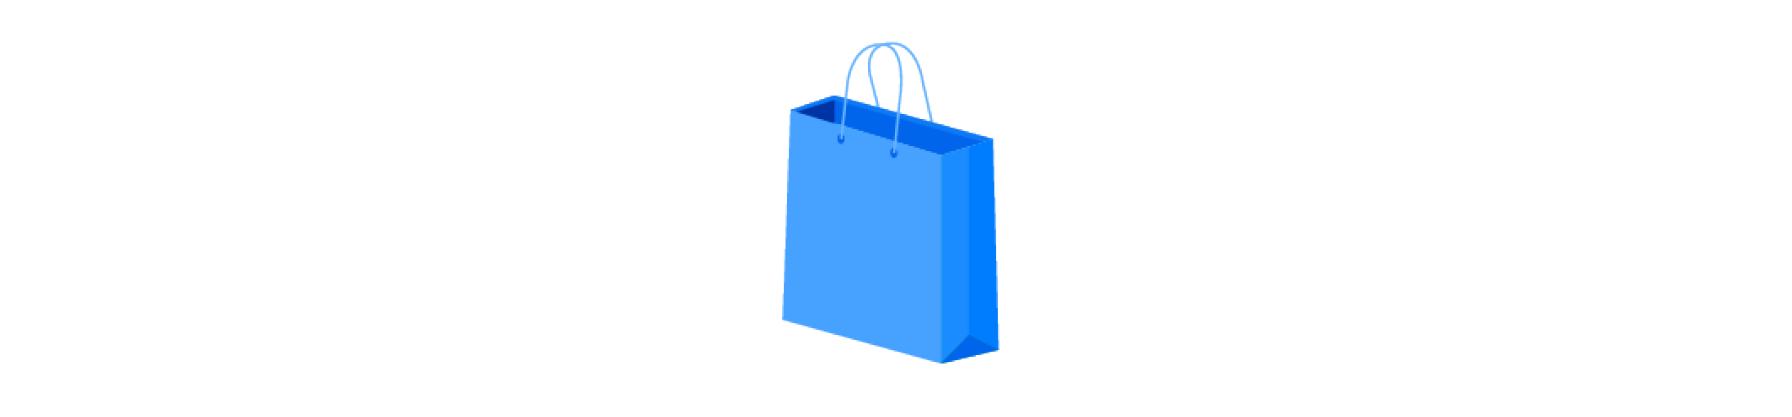 Illustrated icon of a shopping bag